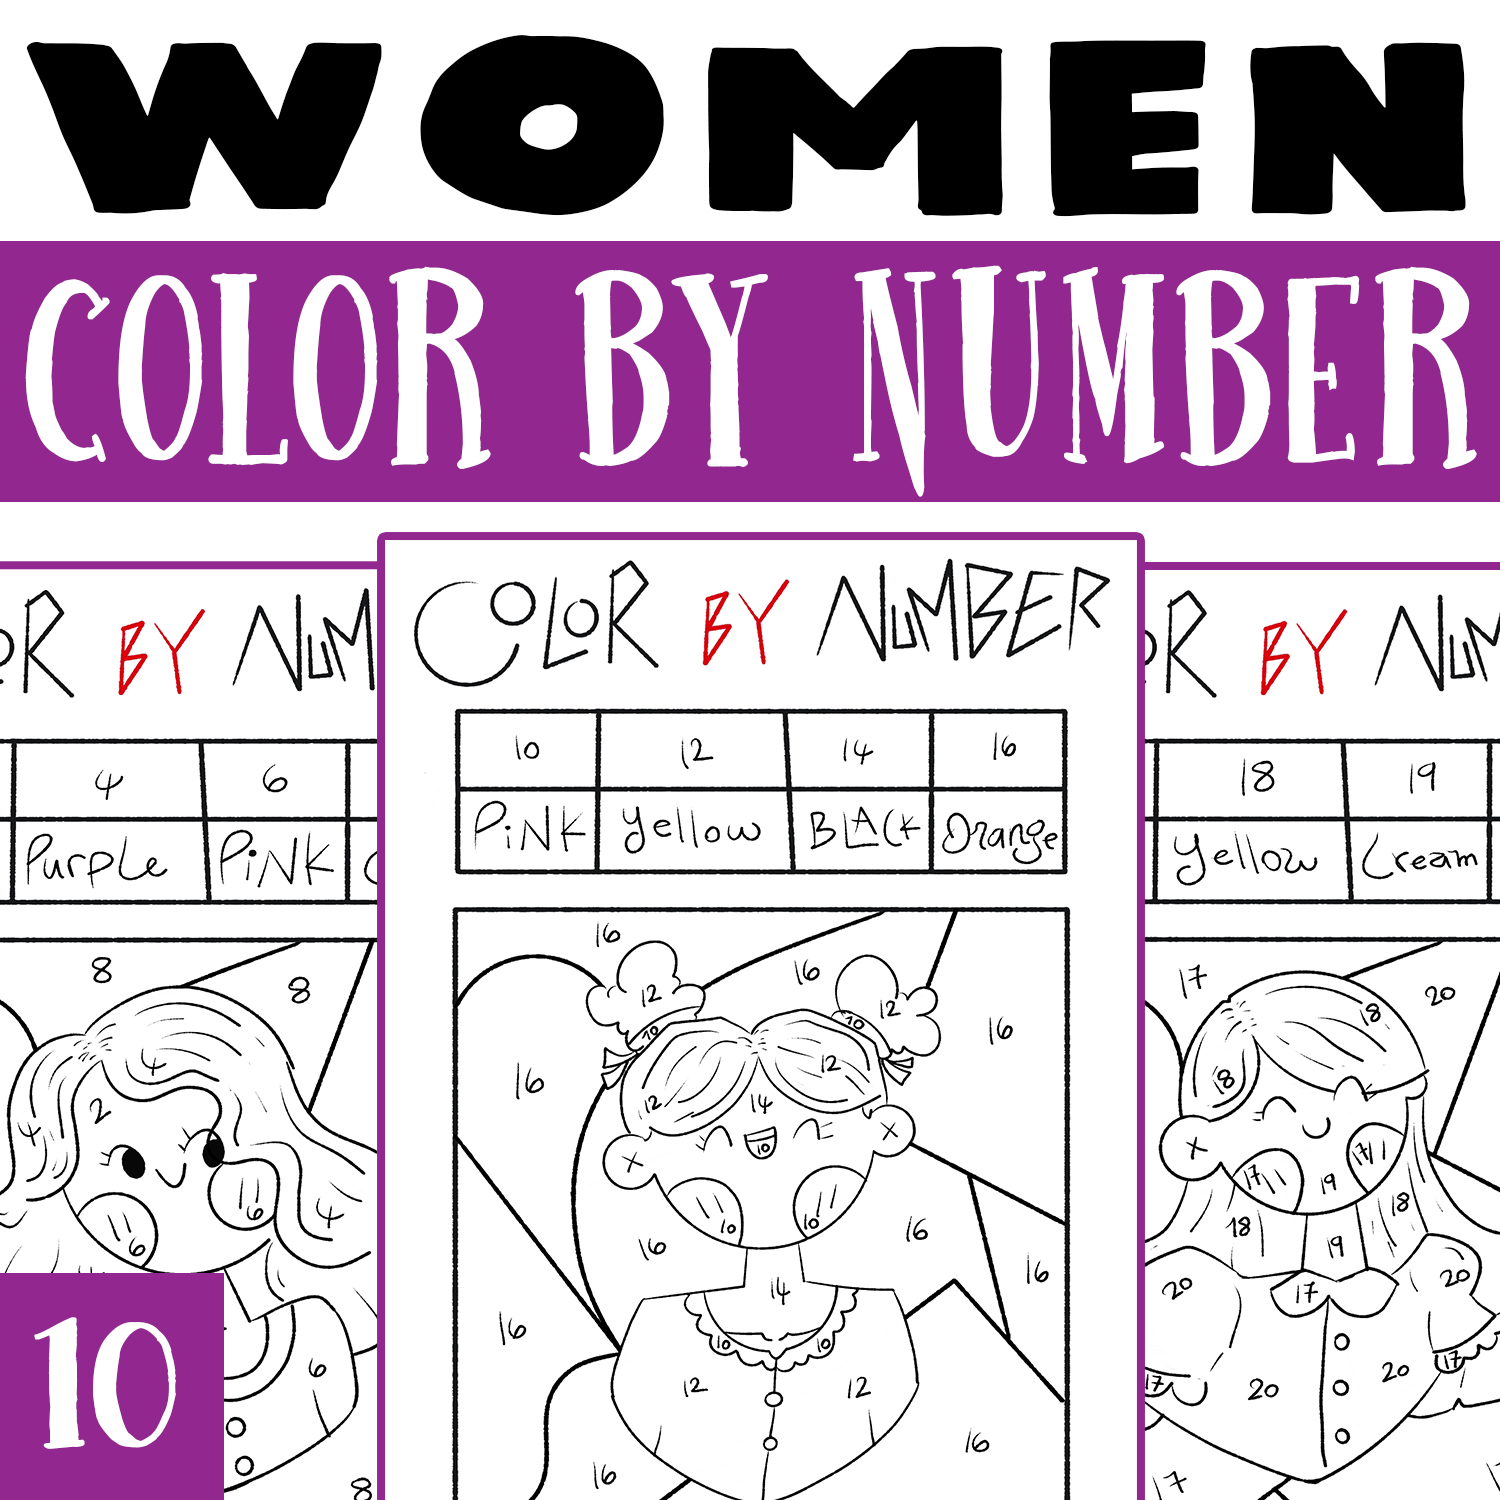 Women color by number women month coloring worksheets activities for kids made by teachers